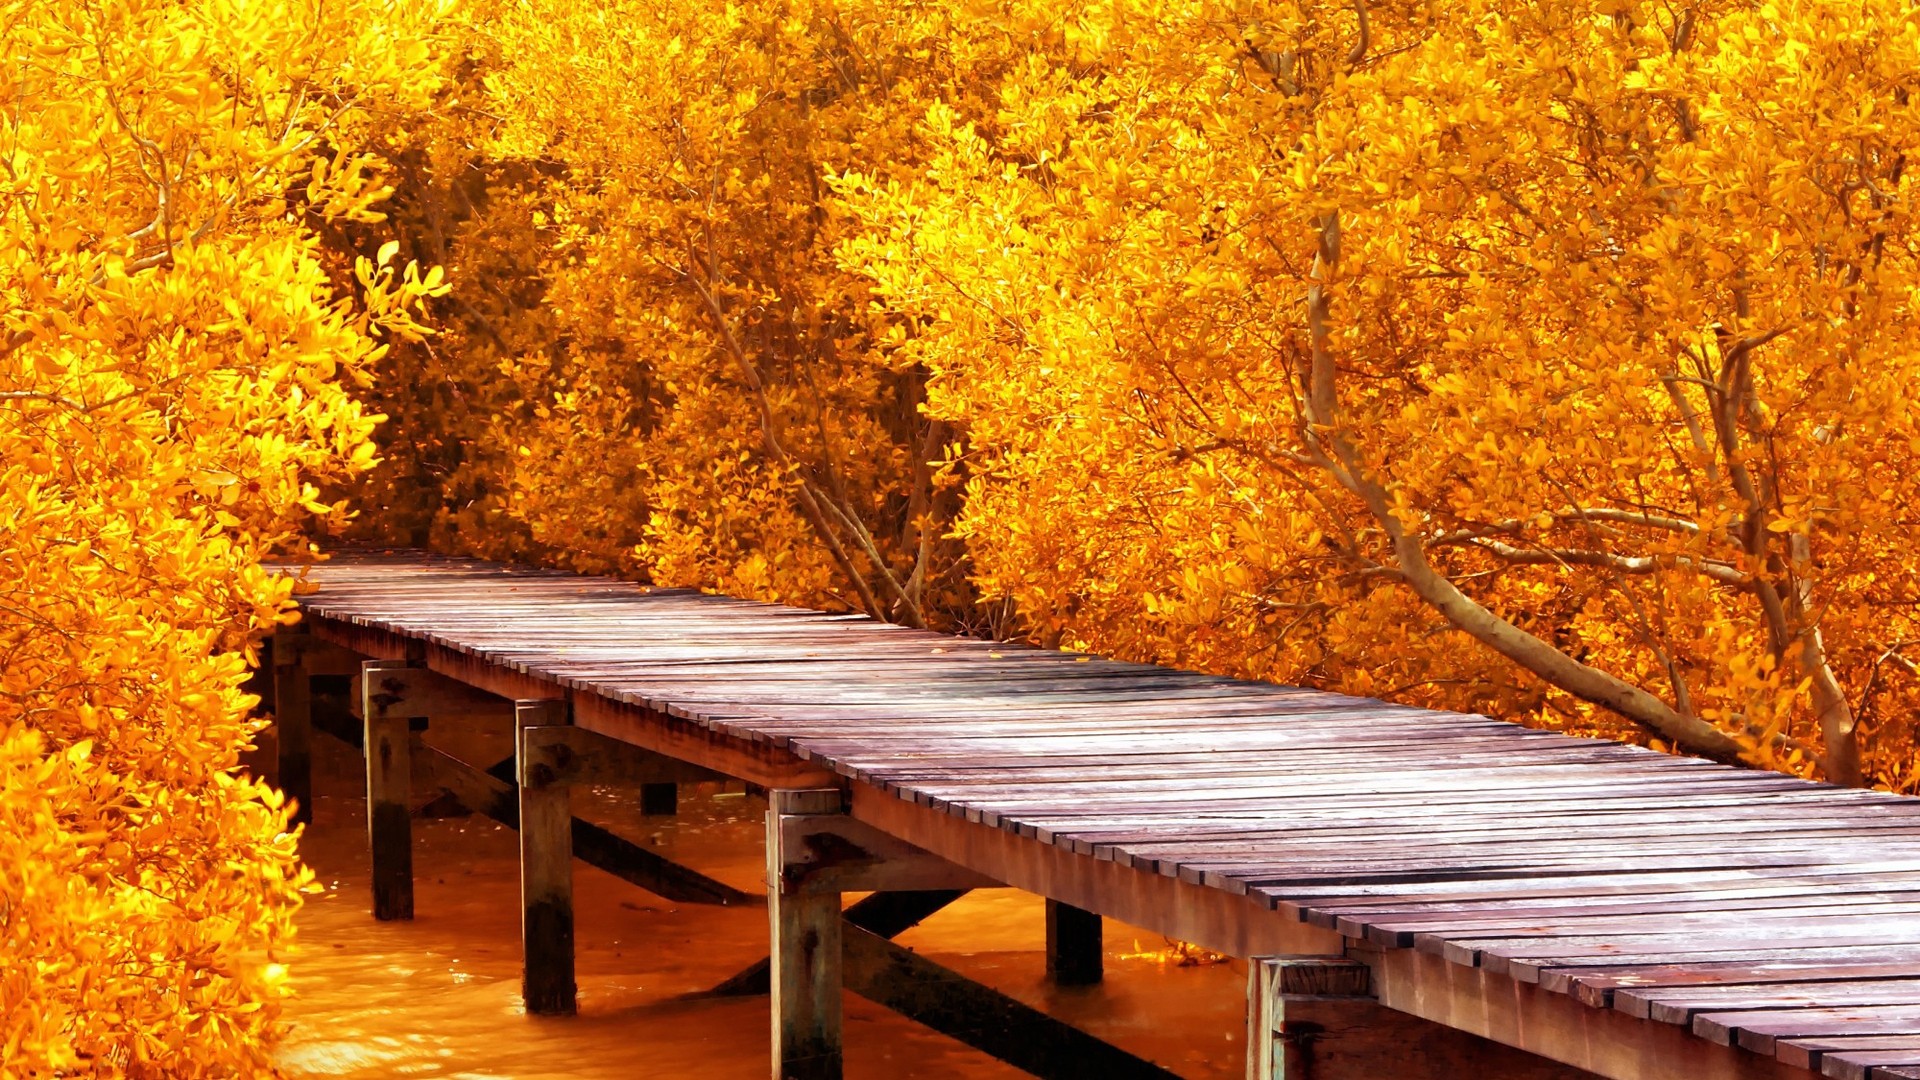 General 1920x1080 nature pier water wooden surface trees yellow leaves fall branch orange